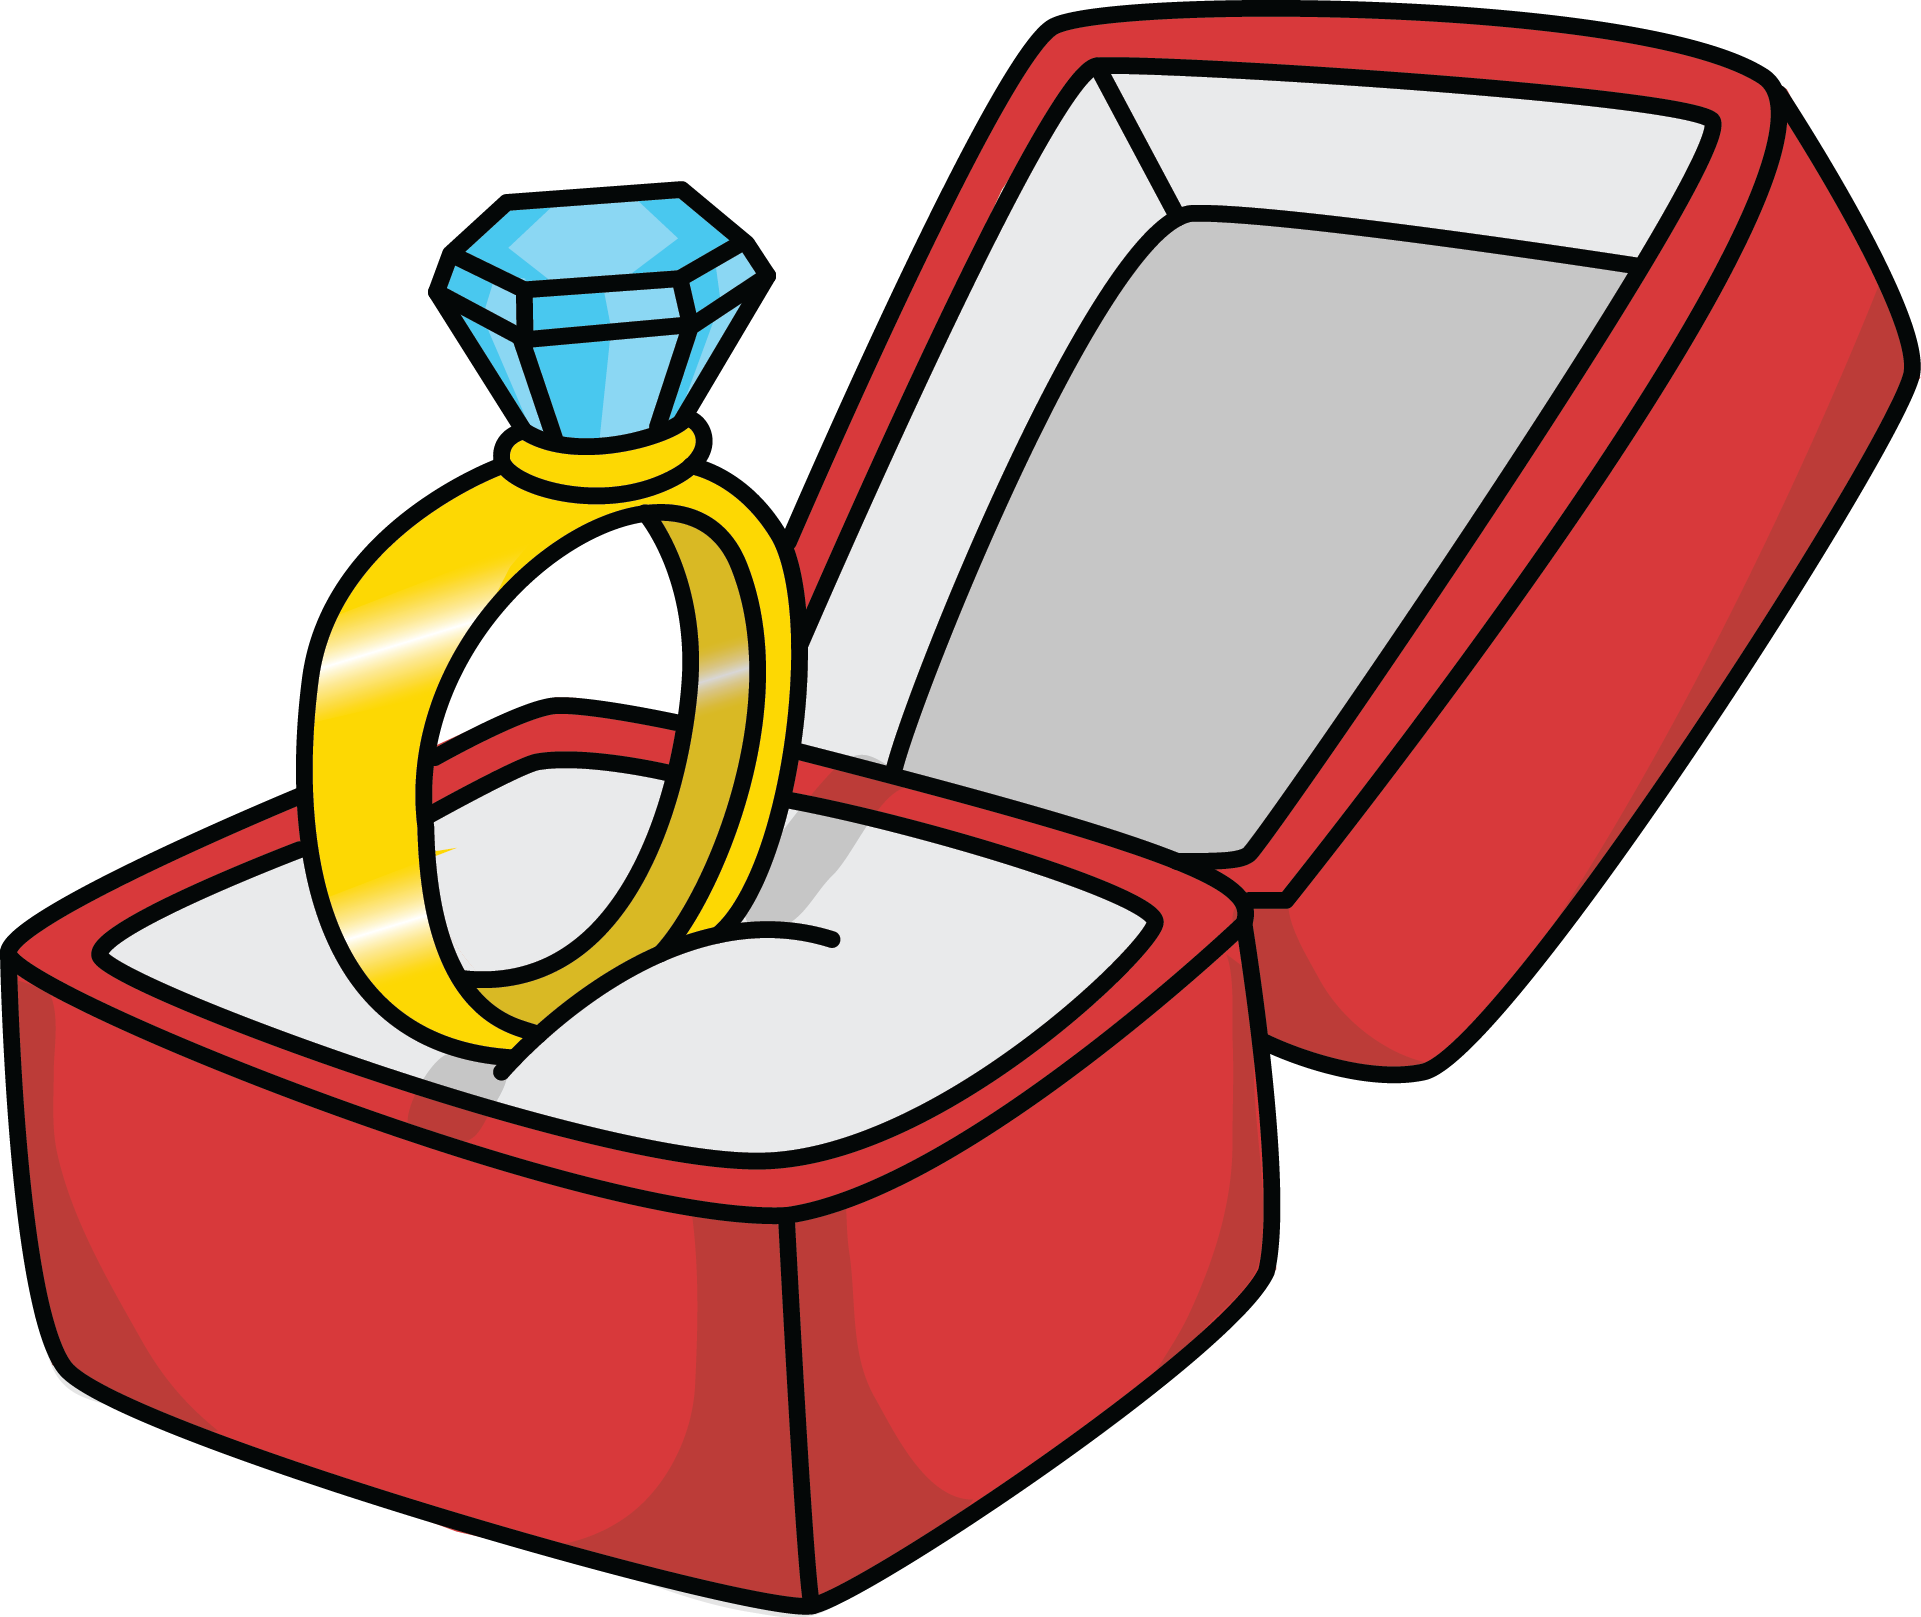 Image For Free Engage Ring Clip Art - Image For Free Engage Ring ...